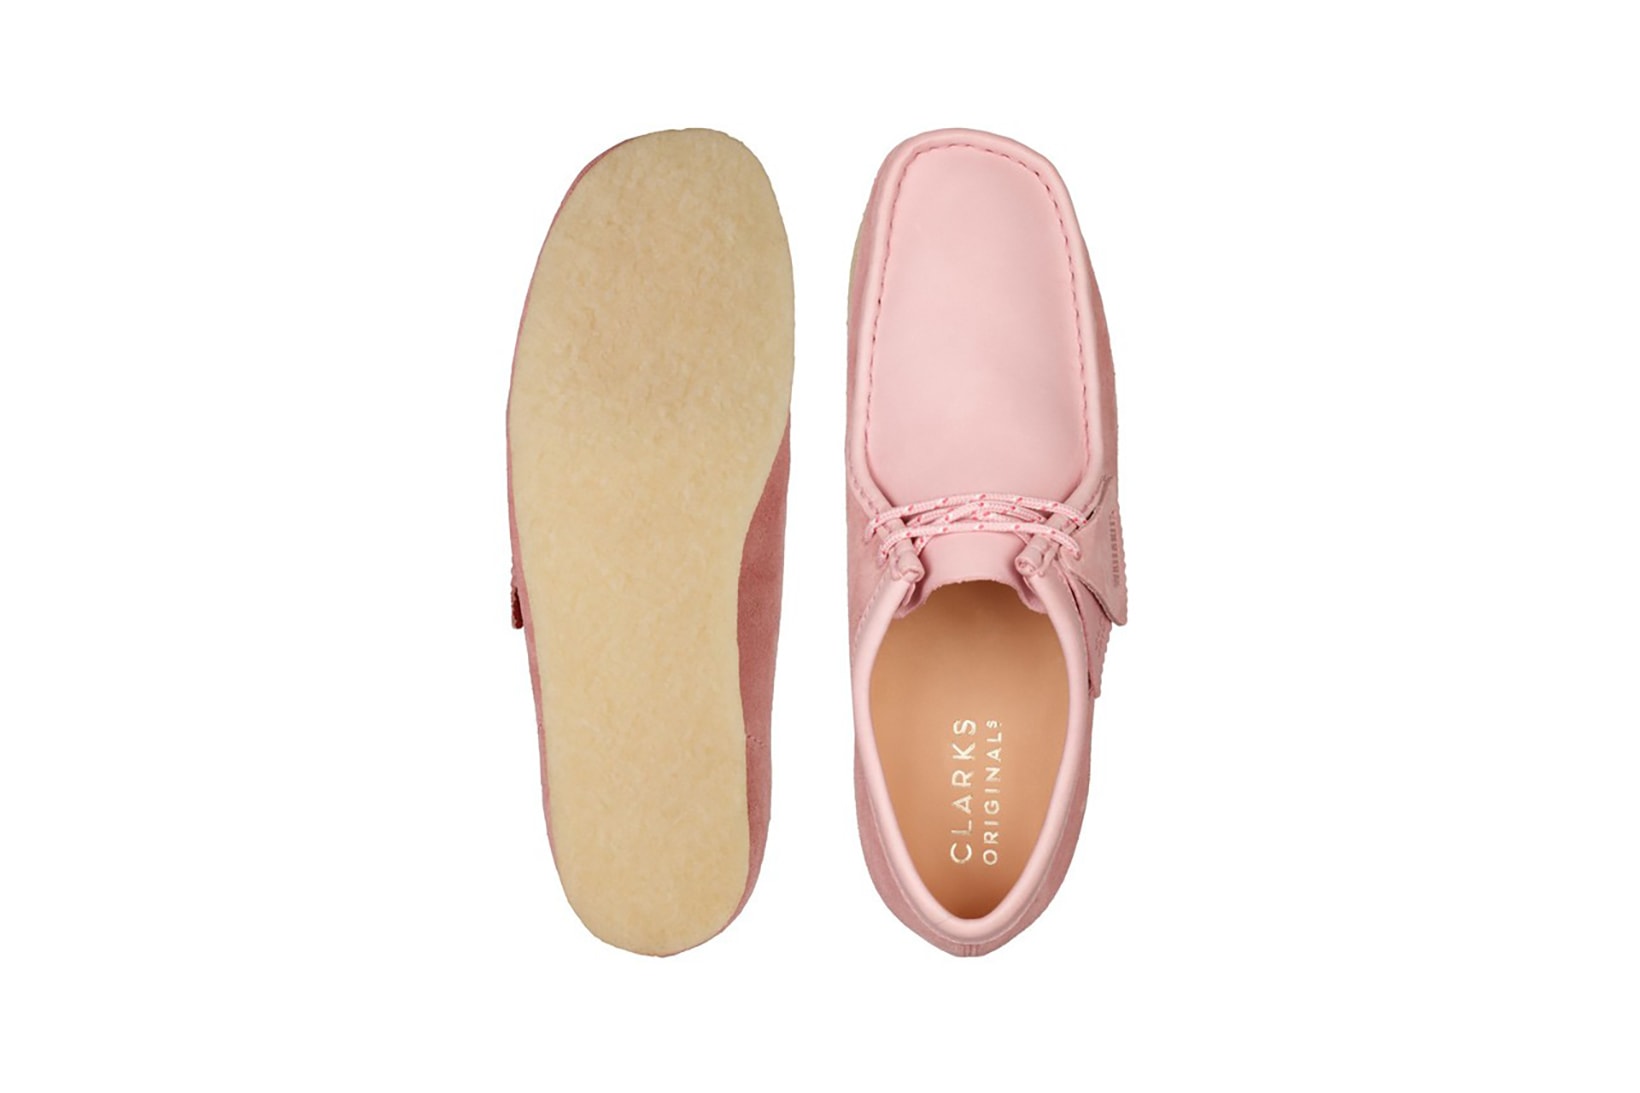 clarks originals combi wallabee pastel pink rose colorway footwear shoes insole sole brown